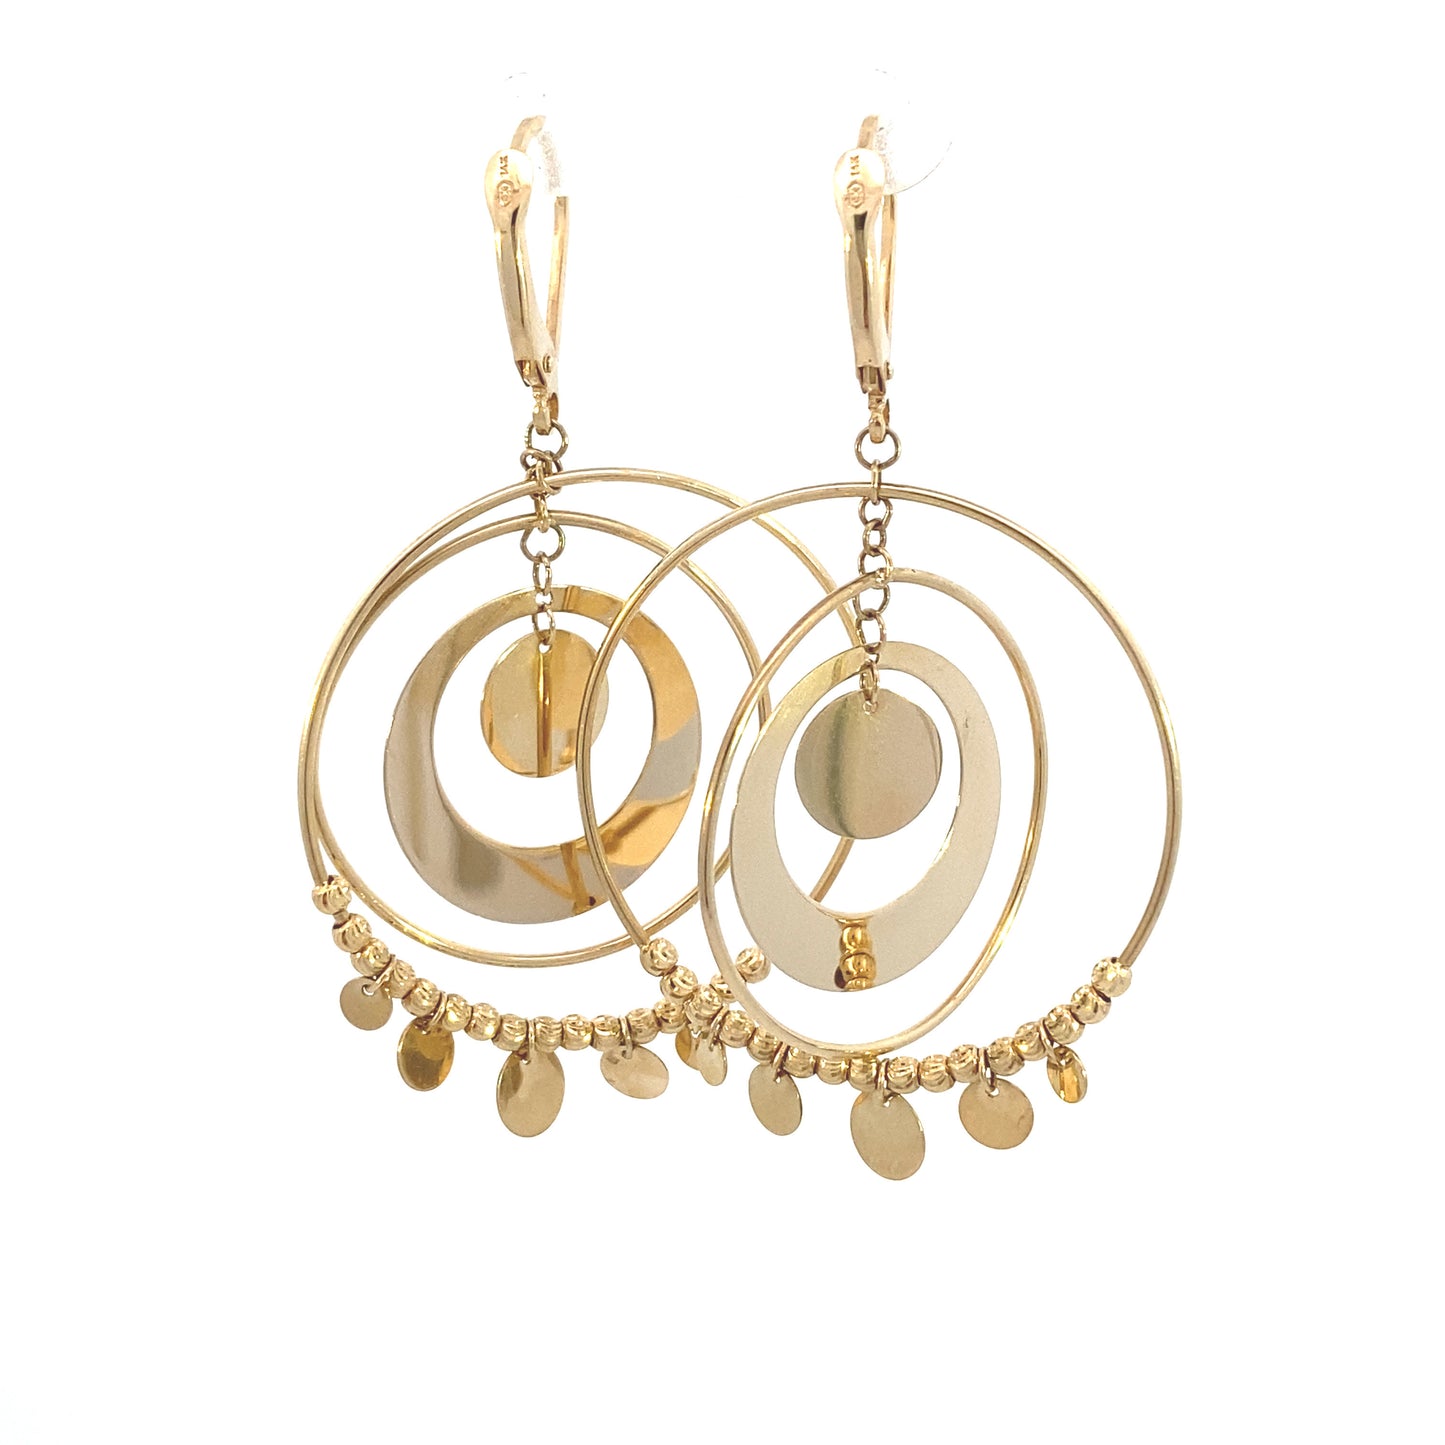 14K Gold Vintage Earring | Luby Gold Collection | Luby 